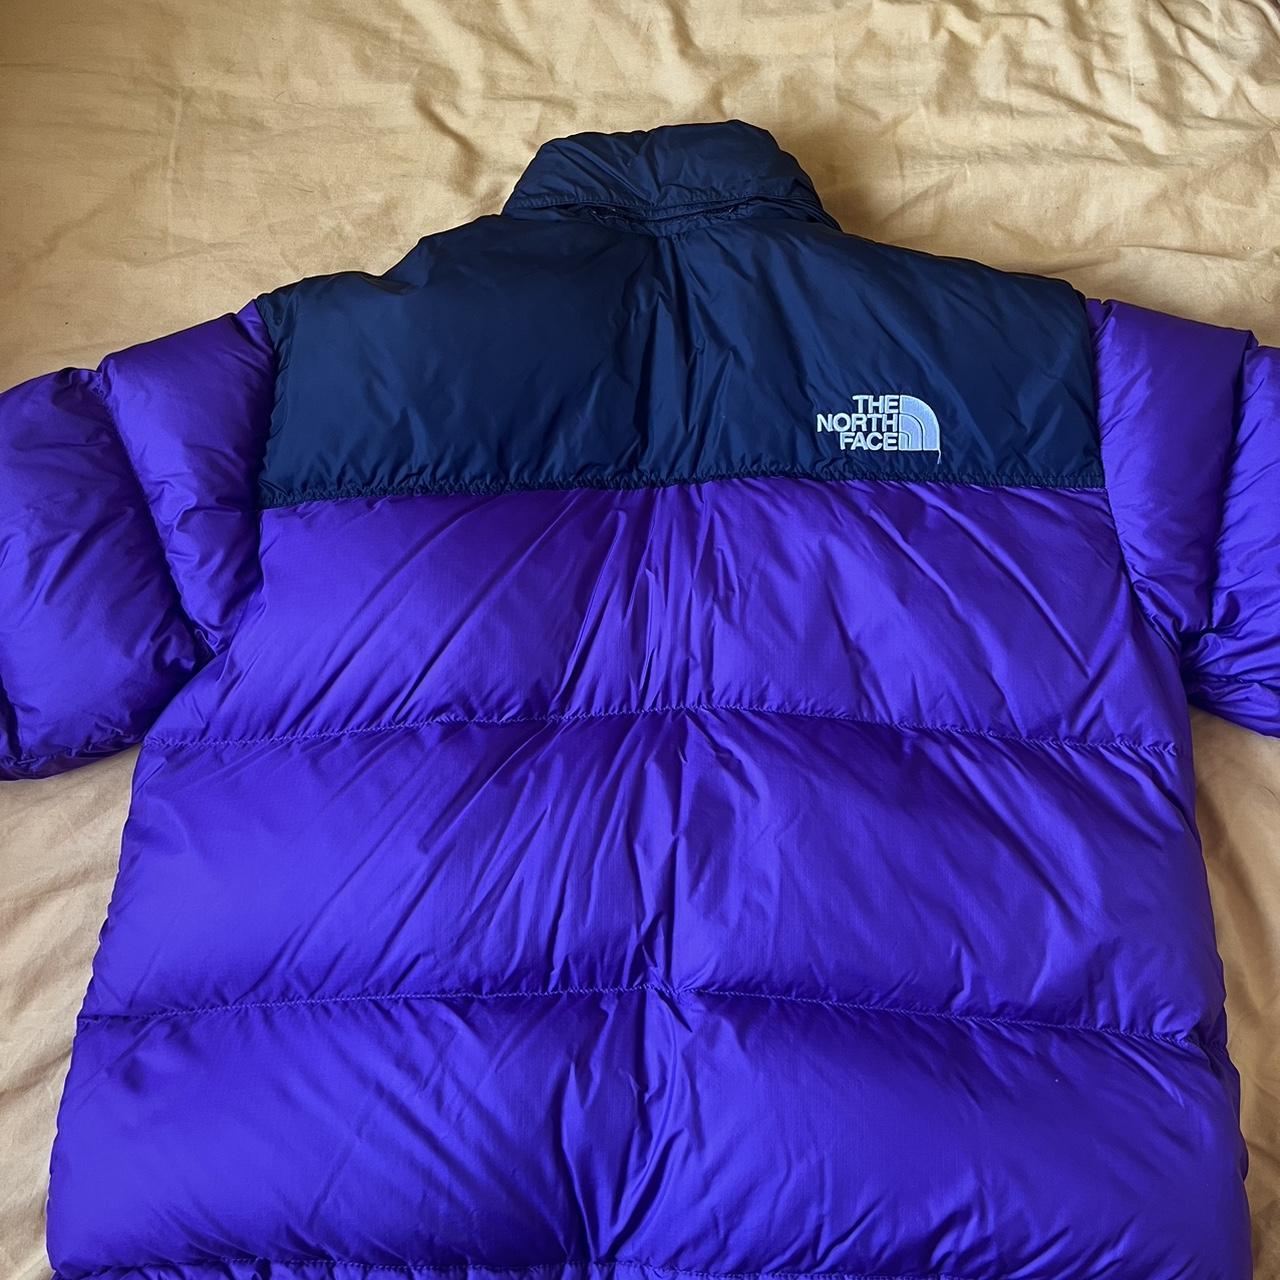 XL The north face puffa, brand new only worn once or... - Depop